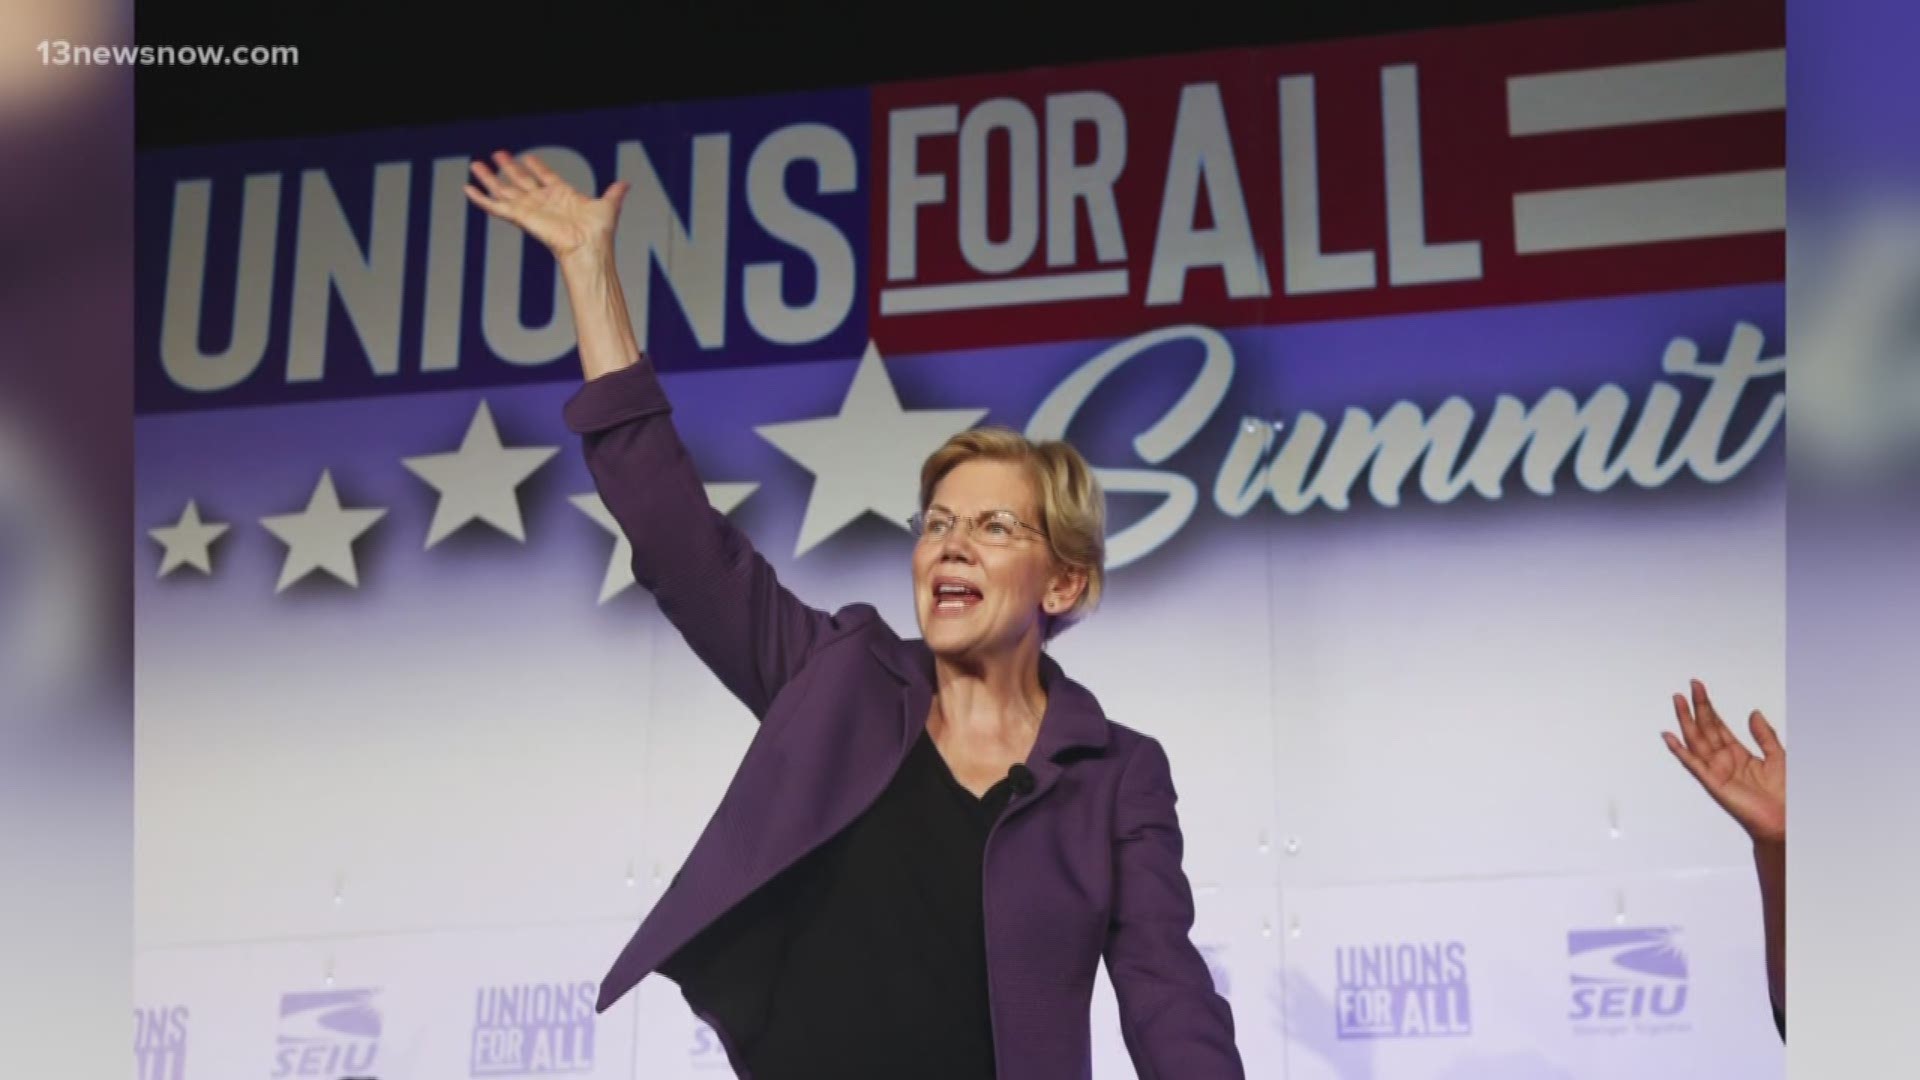 Elizabeth Warren will host a town hall in Norfolk on October 18. The Democratic presidential candidate is leading in the polls over Joe Biden.